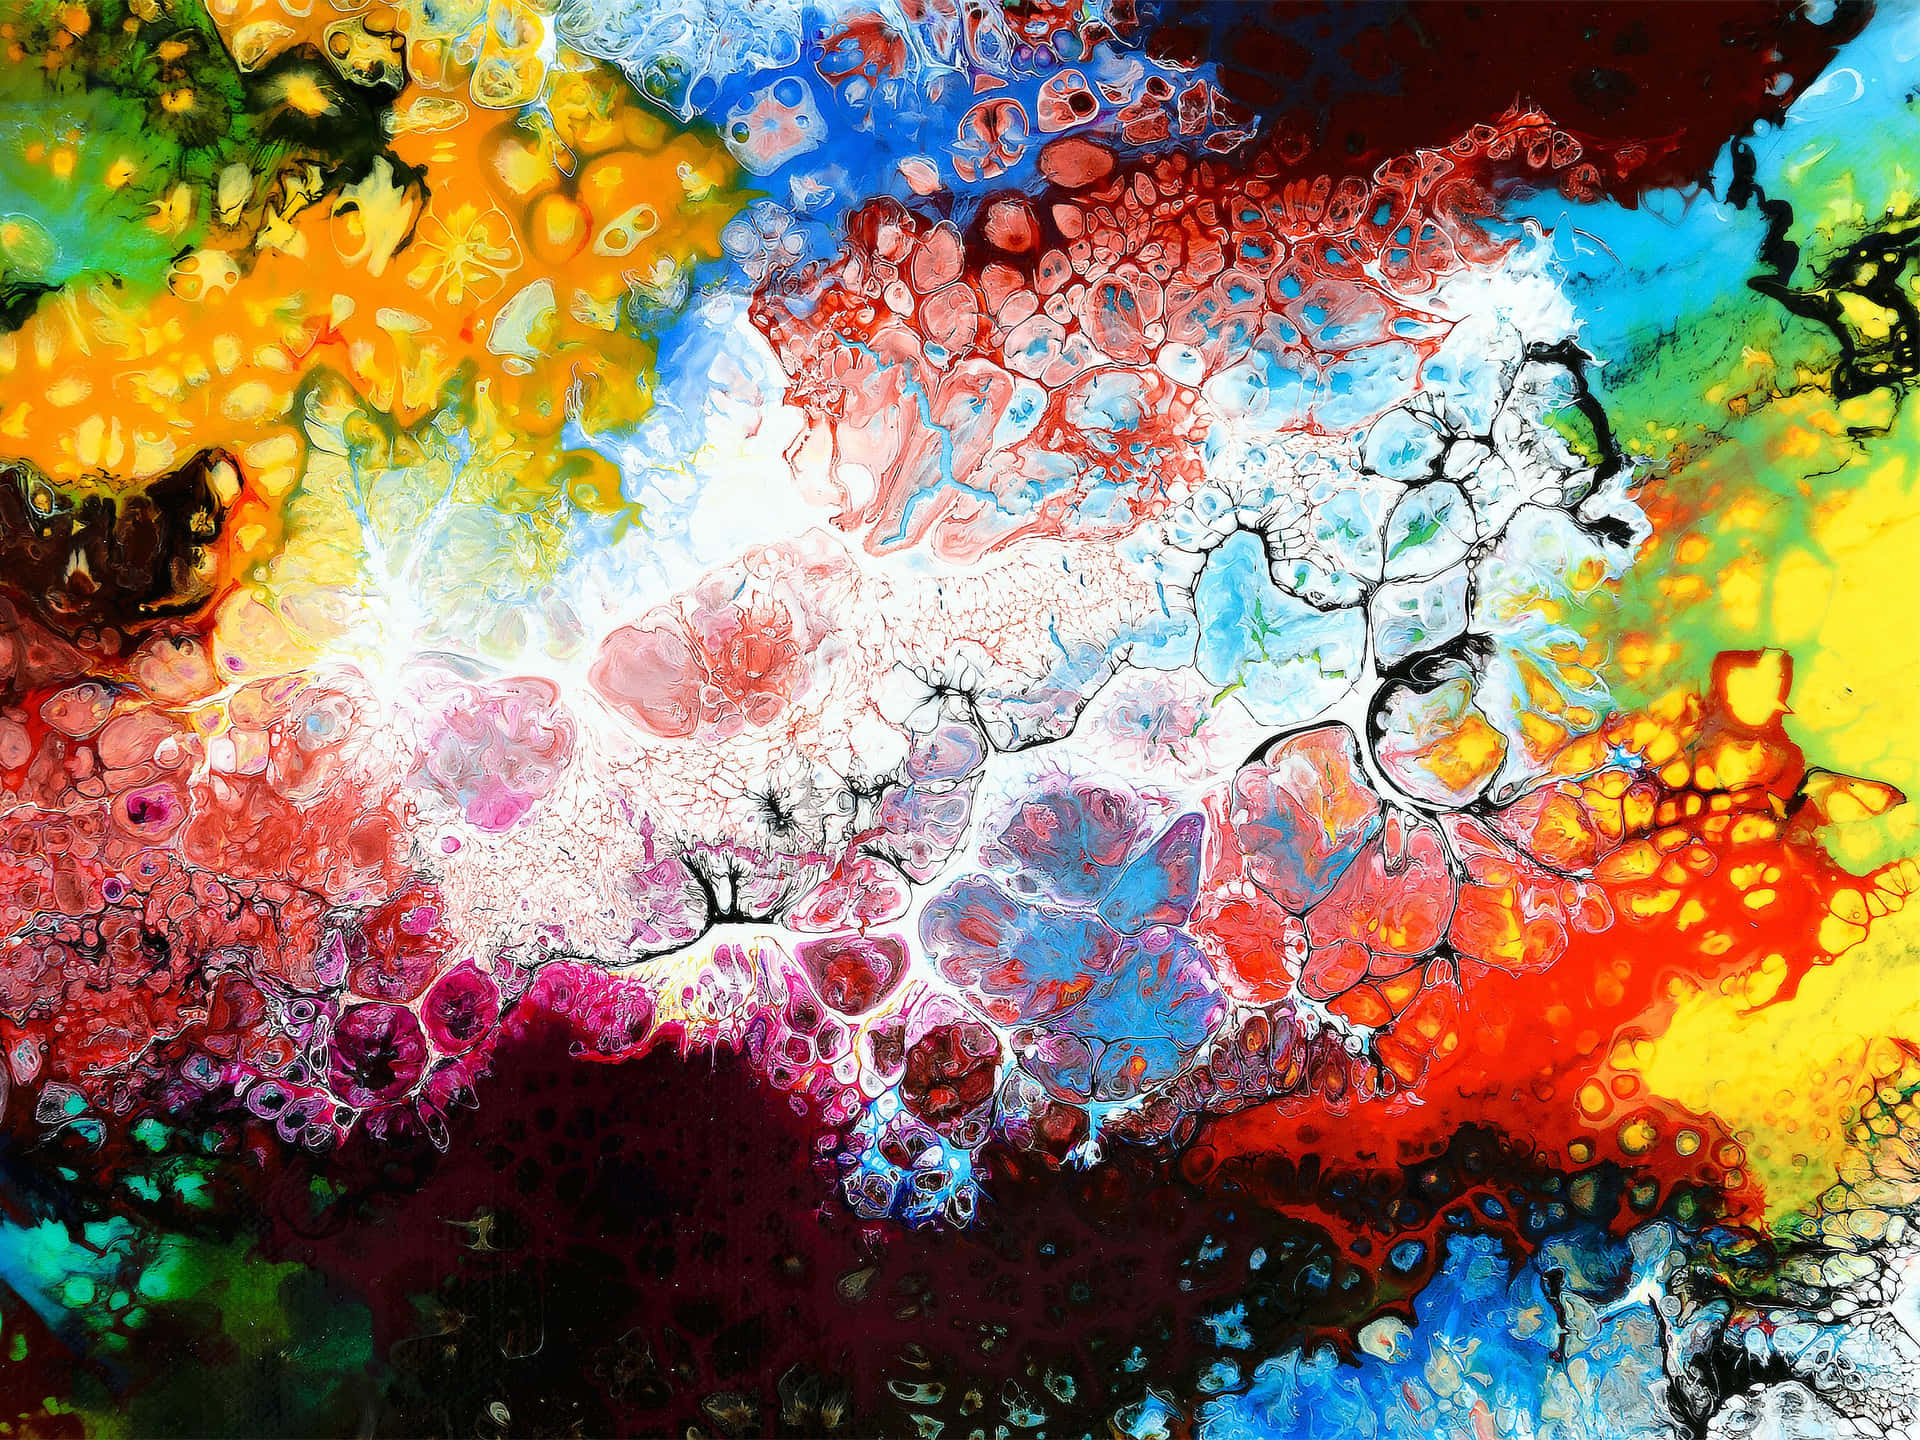 Splattering Paint - Unconventional and Creative